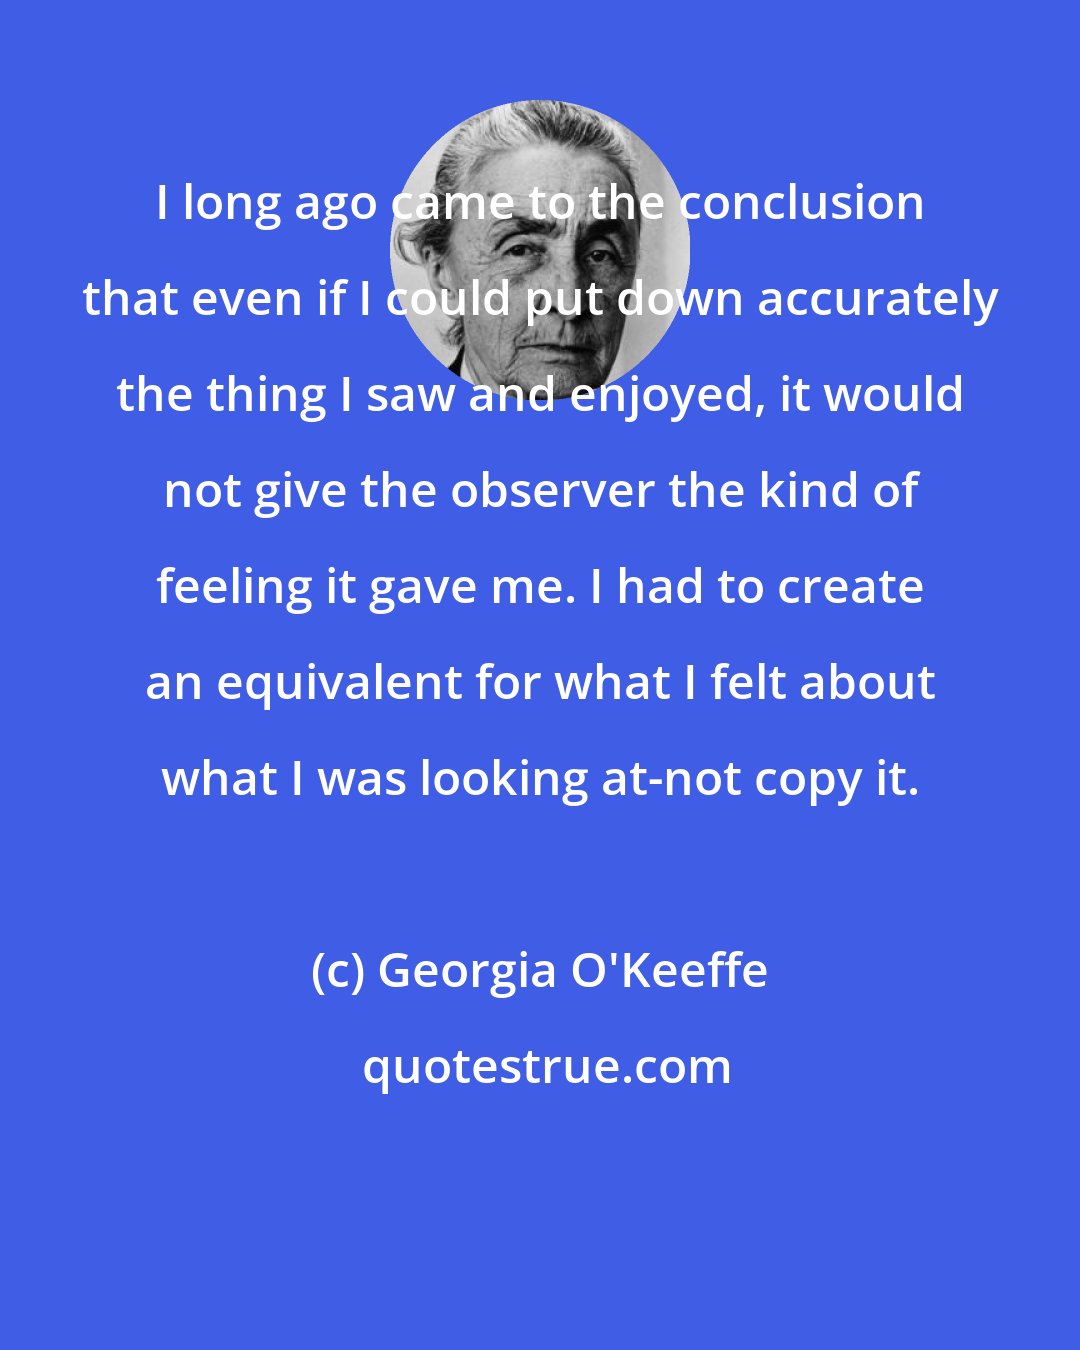 Georgia O'Keeffe: I long ago came to the conclusion that even if I could put down accurately the thing I saw and enjoyed, it would not give the observer the kind of feeling it gave me. I had to create an equivalent for what I felt about what I was looking at-not copy it.